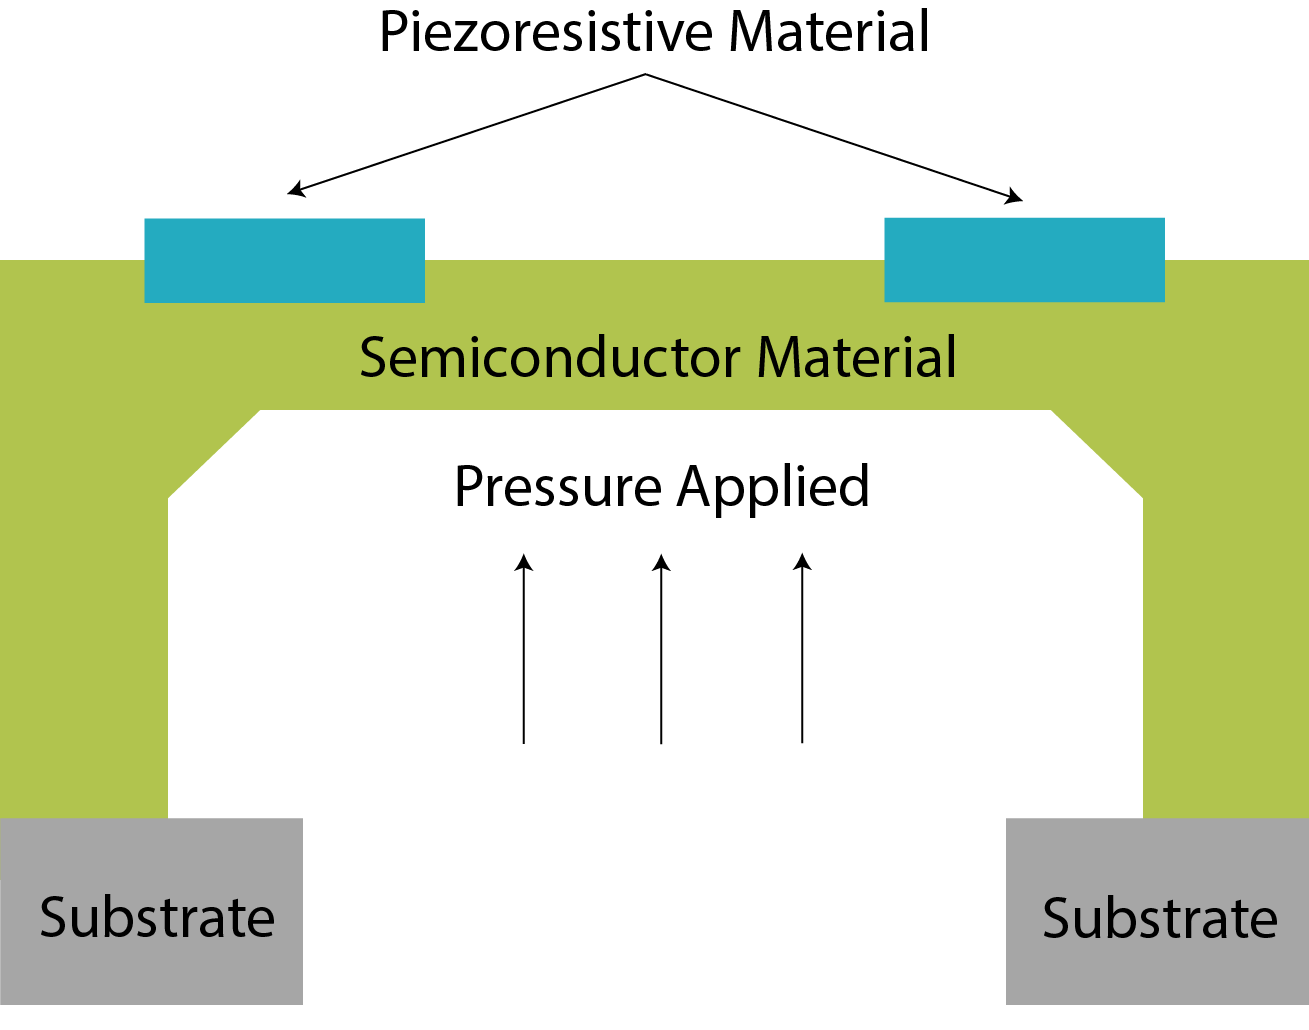 MEMS architecture for Medical Pressure Sensing has a piezo-resistive layer that produces deflection in the electric voltage.